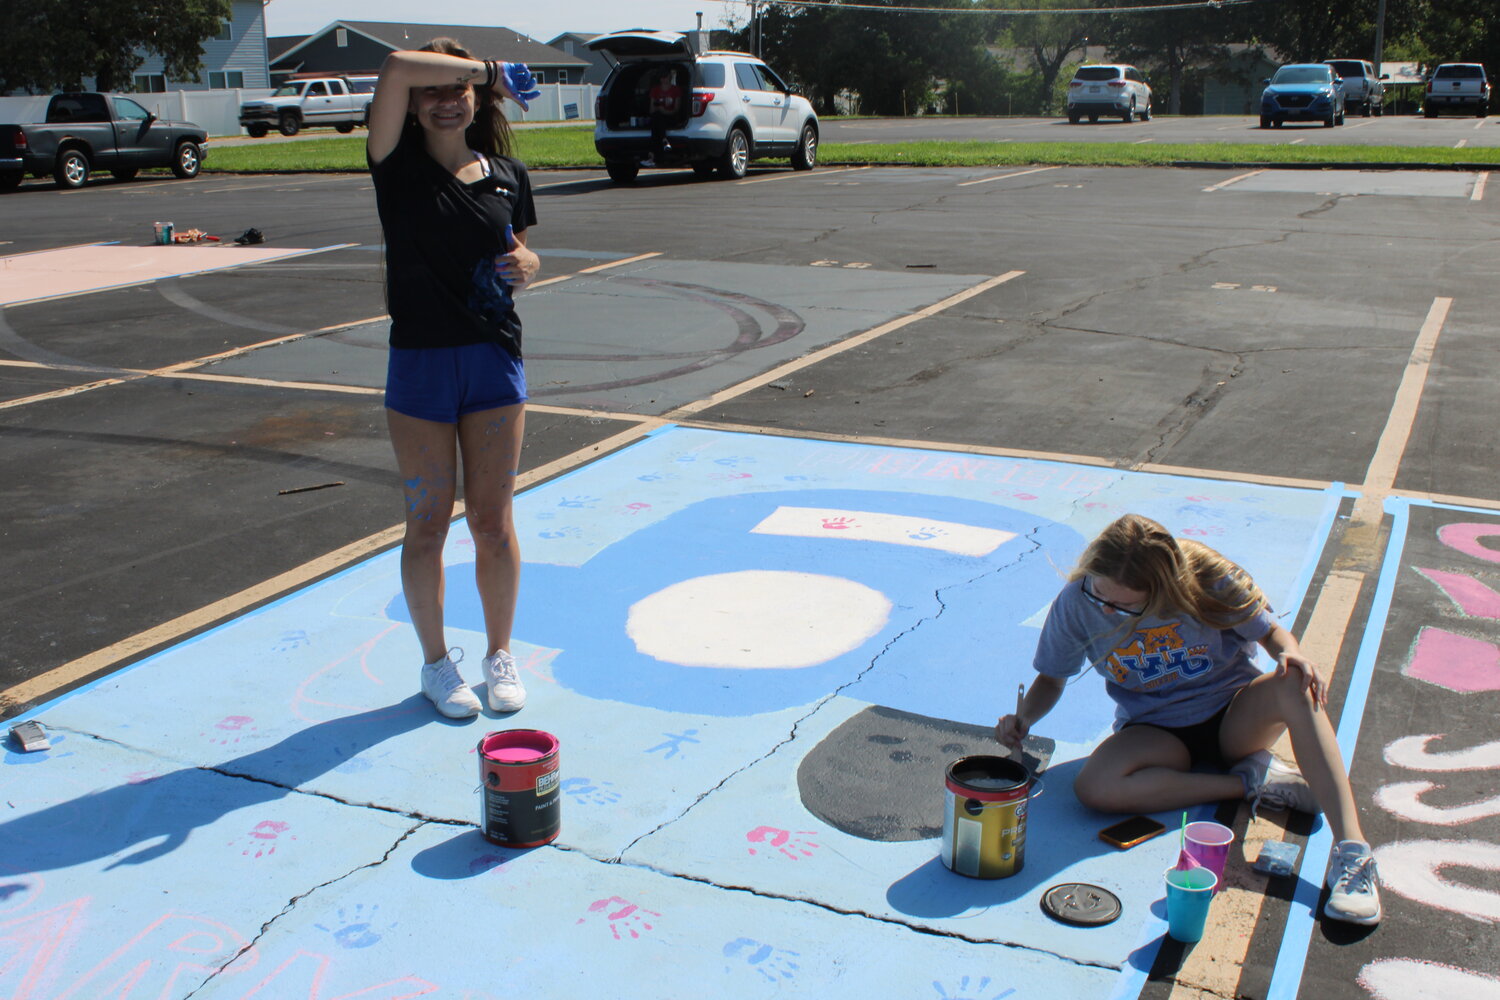 Incoming Wright City seniors Cloe Stuart and Mackenzie Reynolds work on painting a parking spot as part of the new high school tradition during the Aug. 11 event.